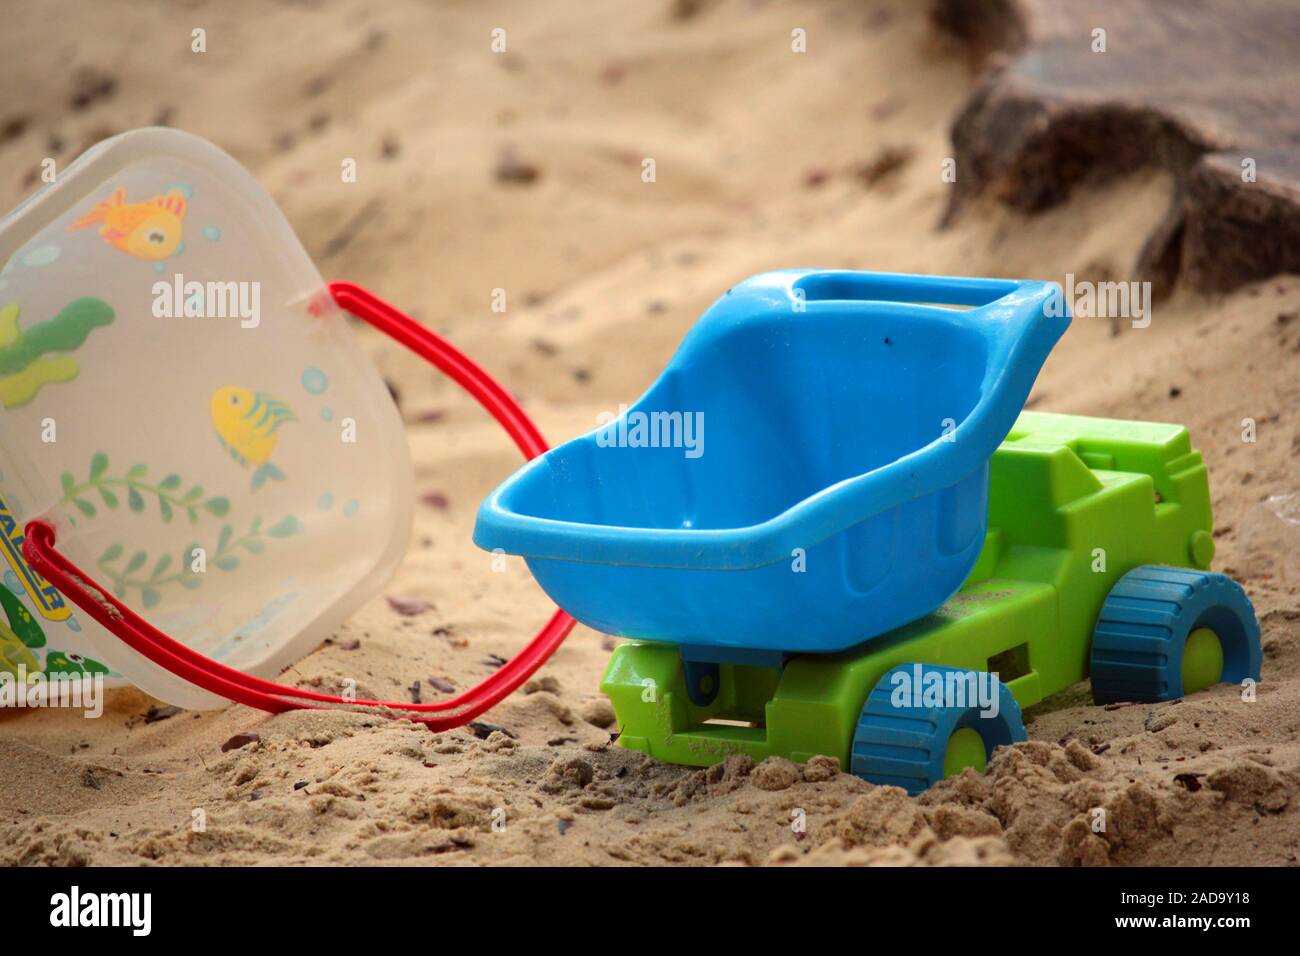 Sandpit with plastic toys Stock Photo